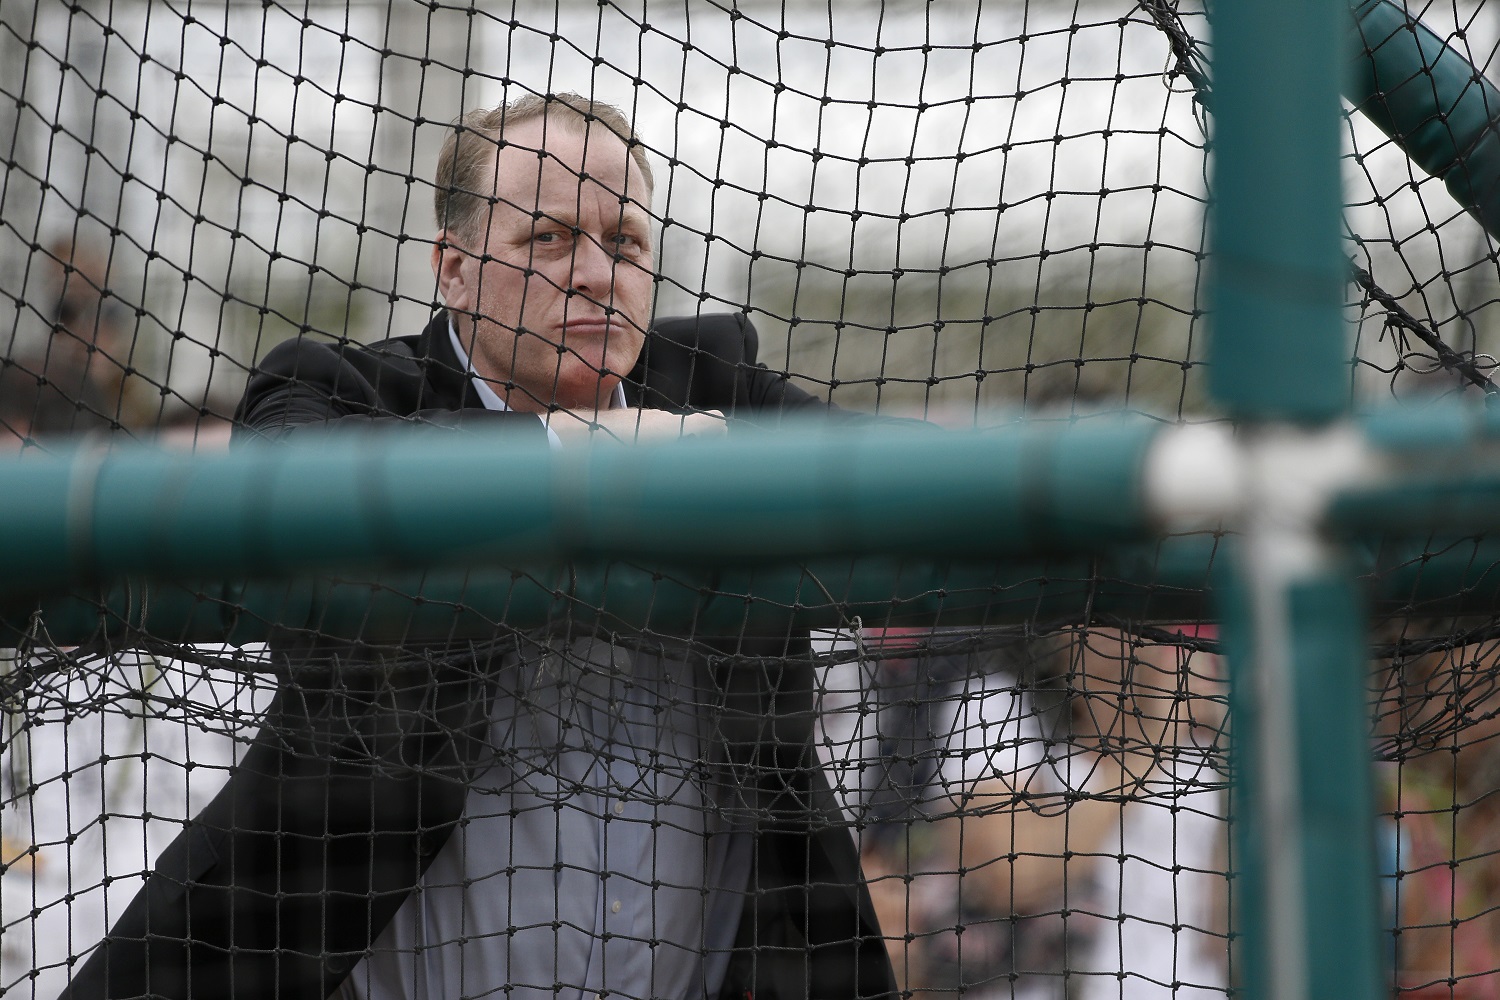 ESPN fired Curt Schilling because he begged them to